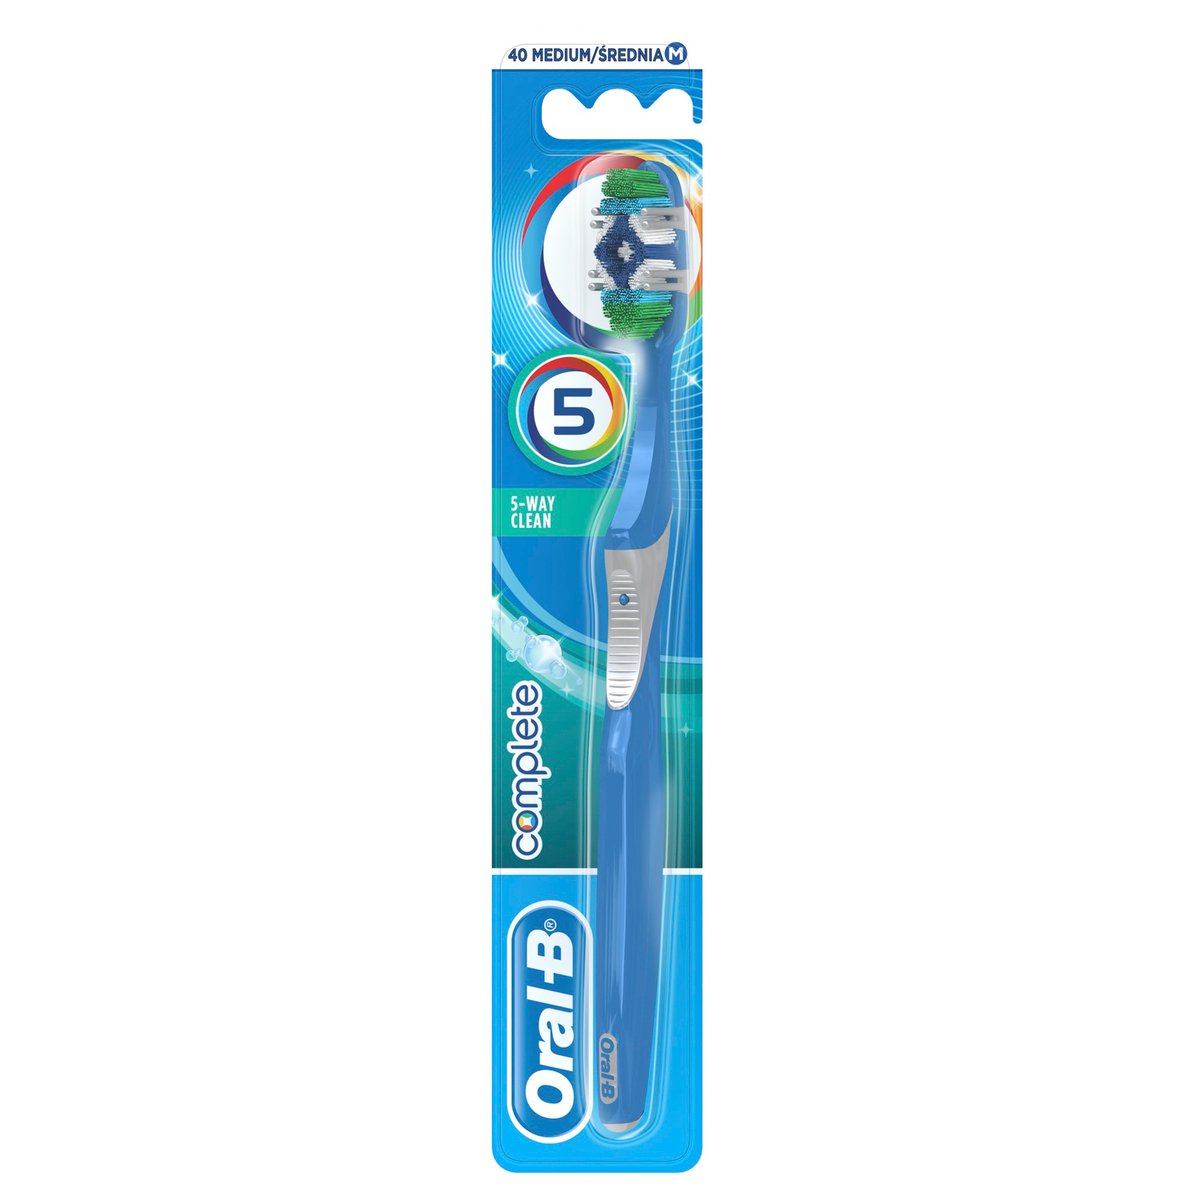 Oral-B Complete 5 Way Clean Medium Manual Toothbrush Assorted Color 1pc